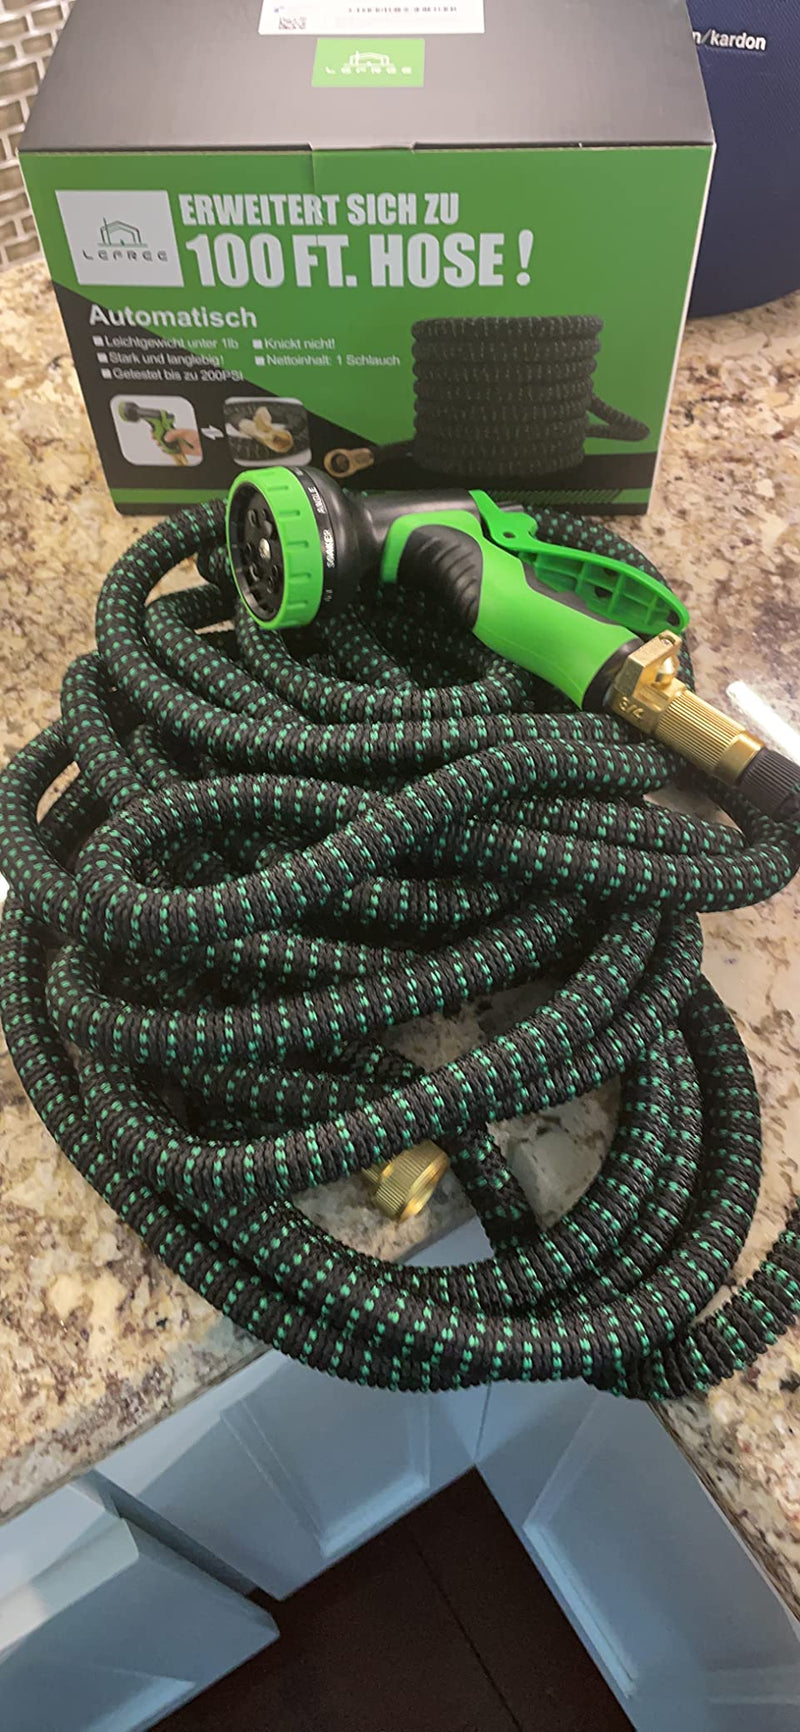 Whether the Best 100 Garden Hose is Suitable for Bathing Pets？